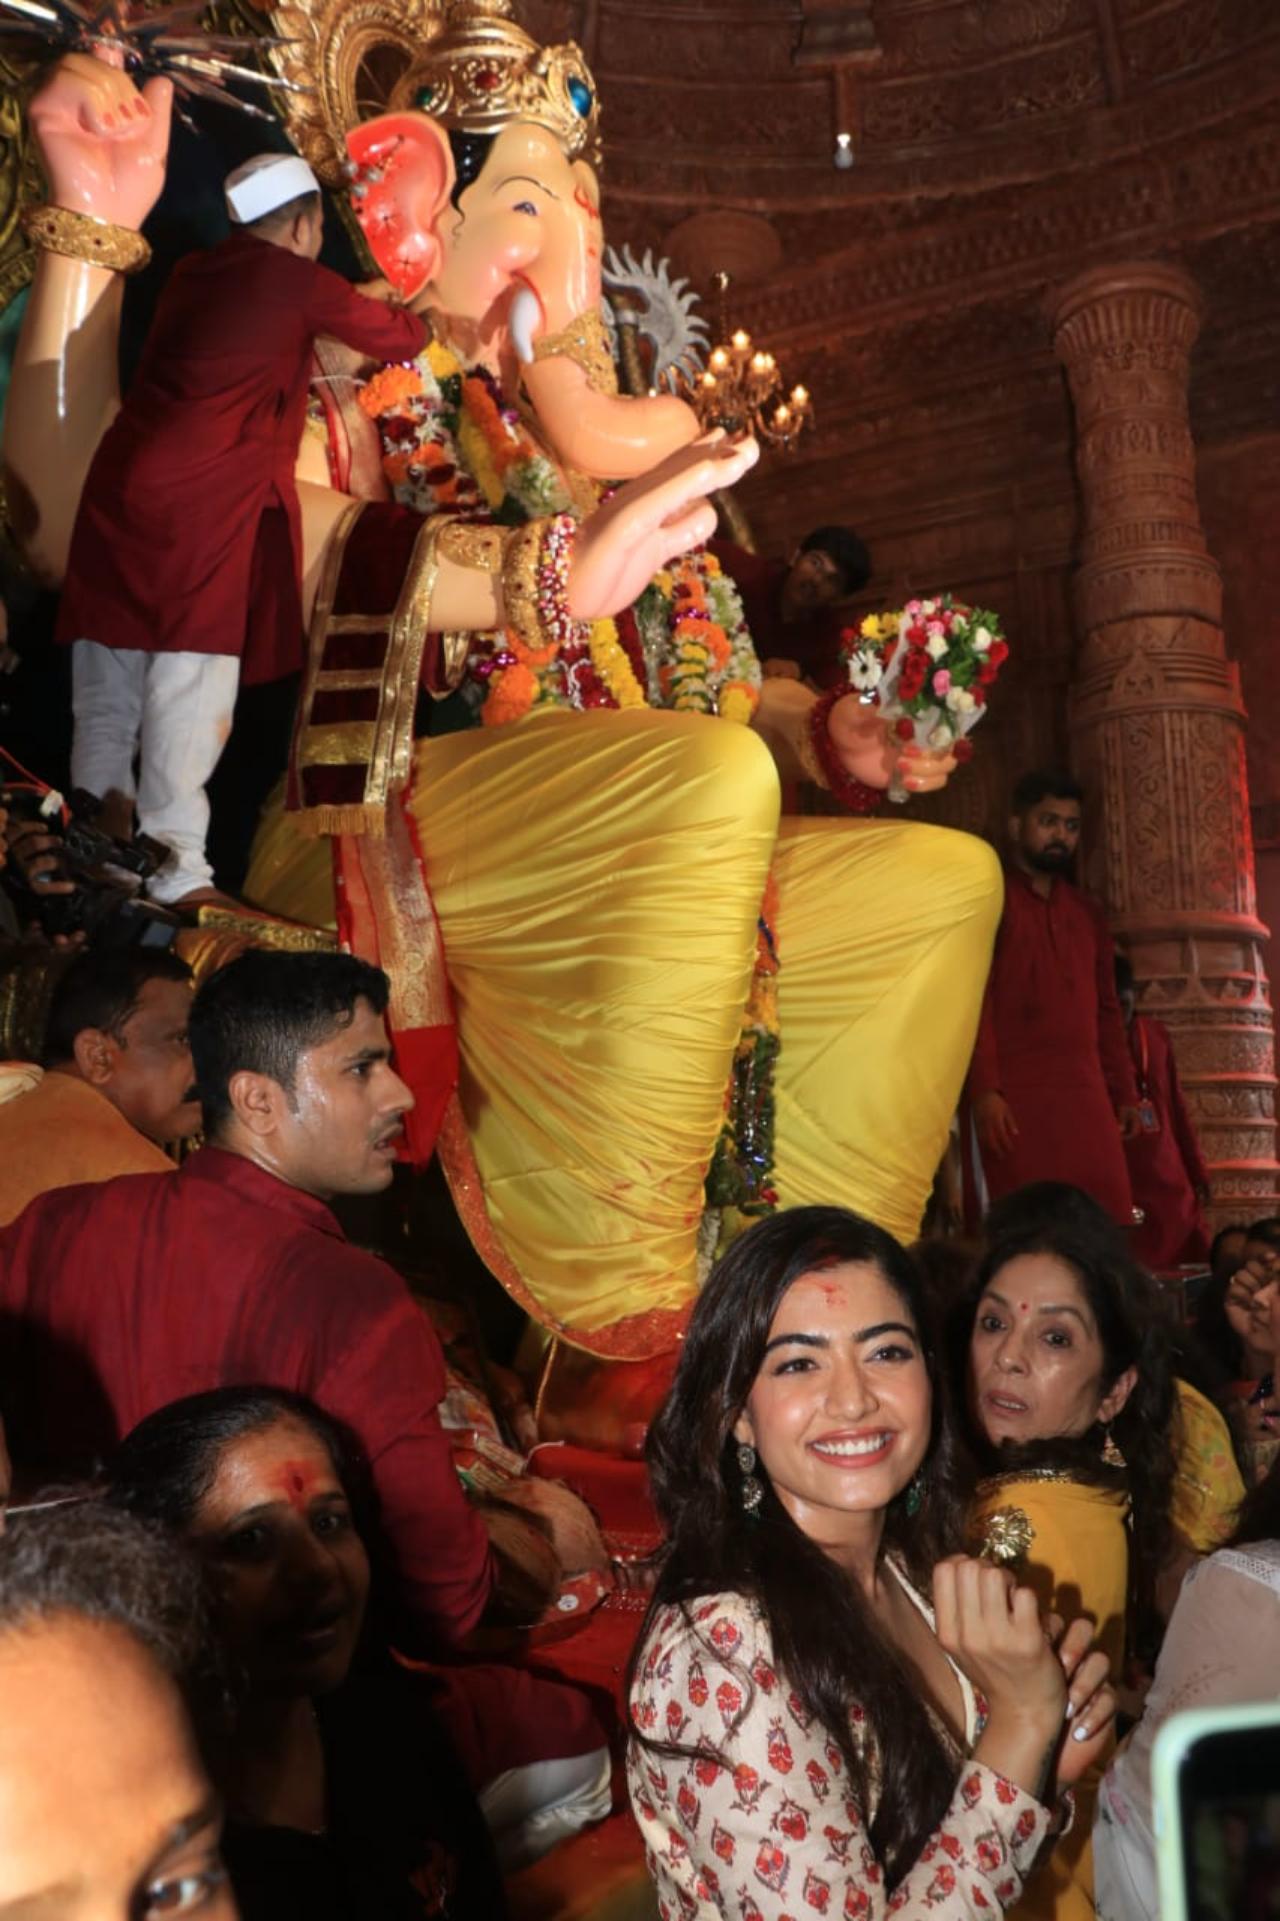 Rashmika was mobbed by onlookers as she arrived at Lalbaug. She was seen smiling in a crowd of people who had gathered to get a glimpse of the actress